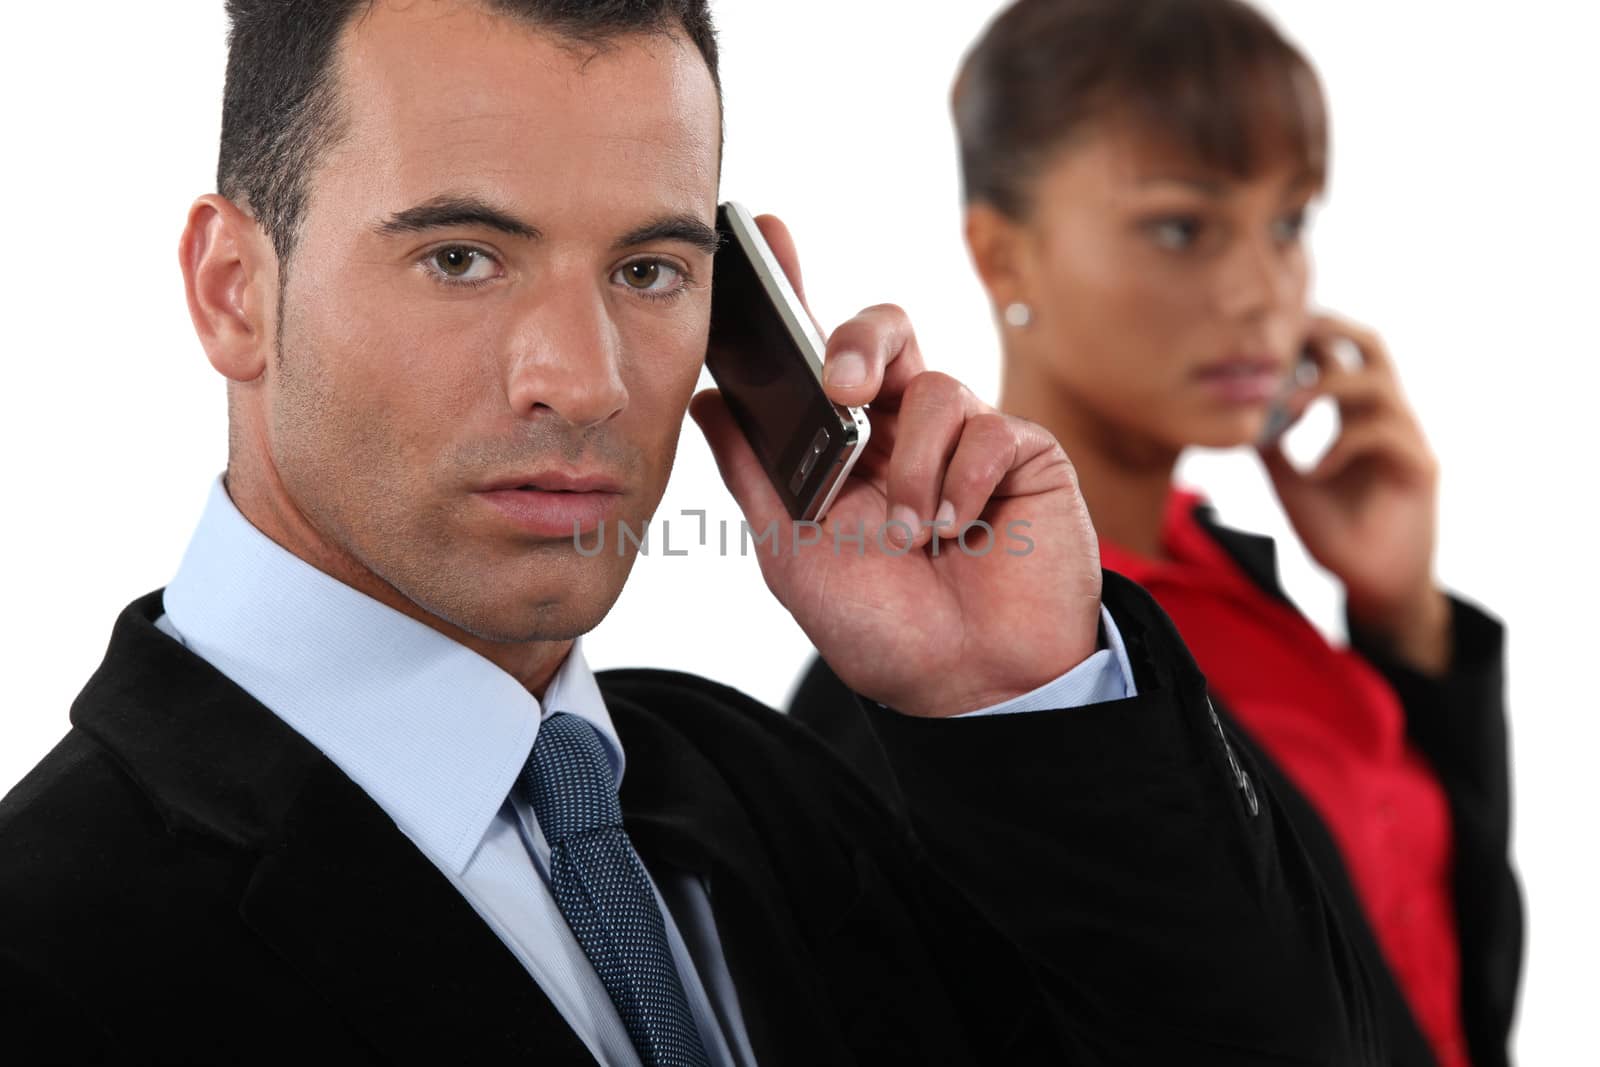 Business professionals talking on their mobile phones